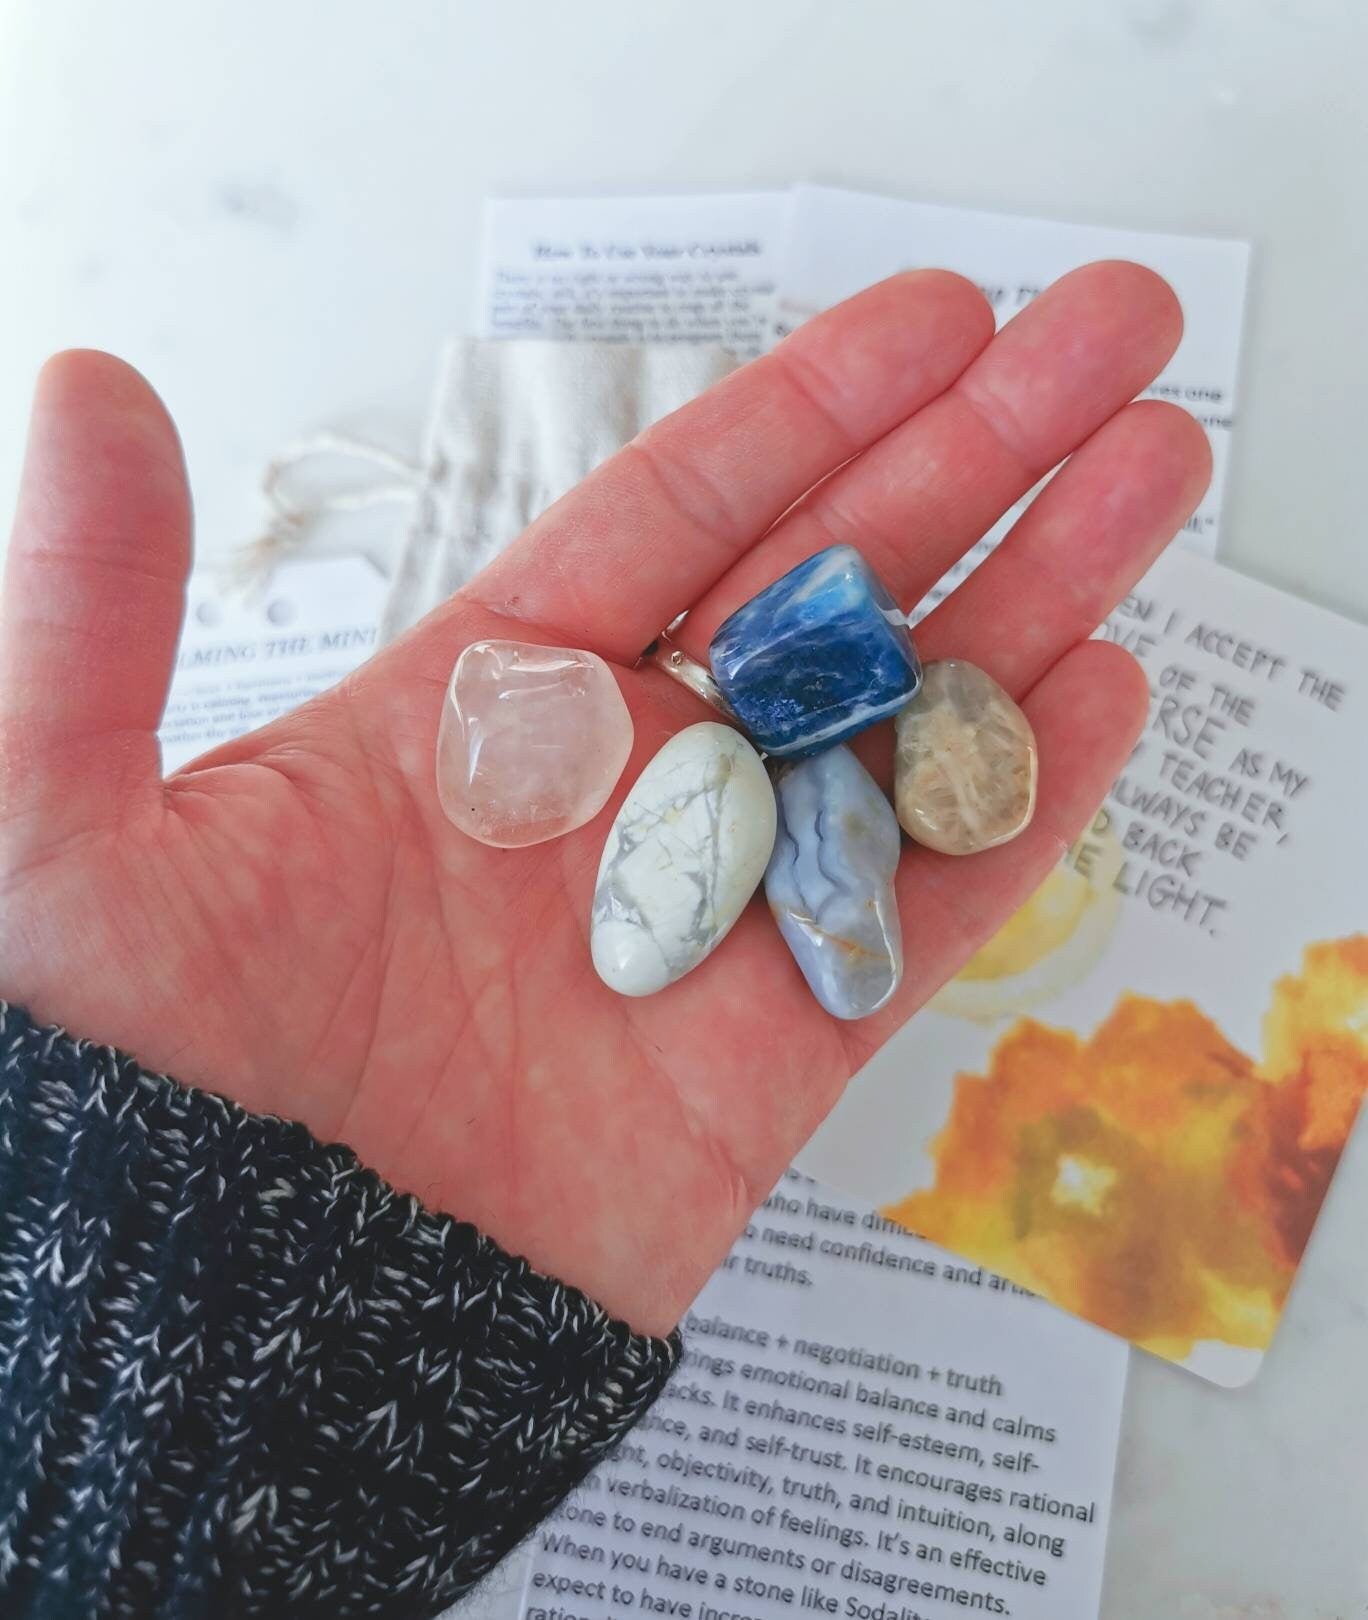 Calming the Mind Crystal Kit